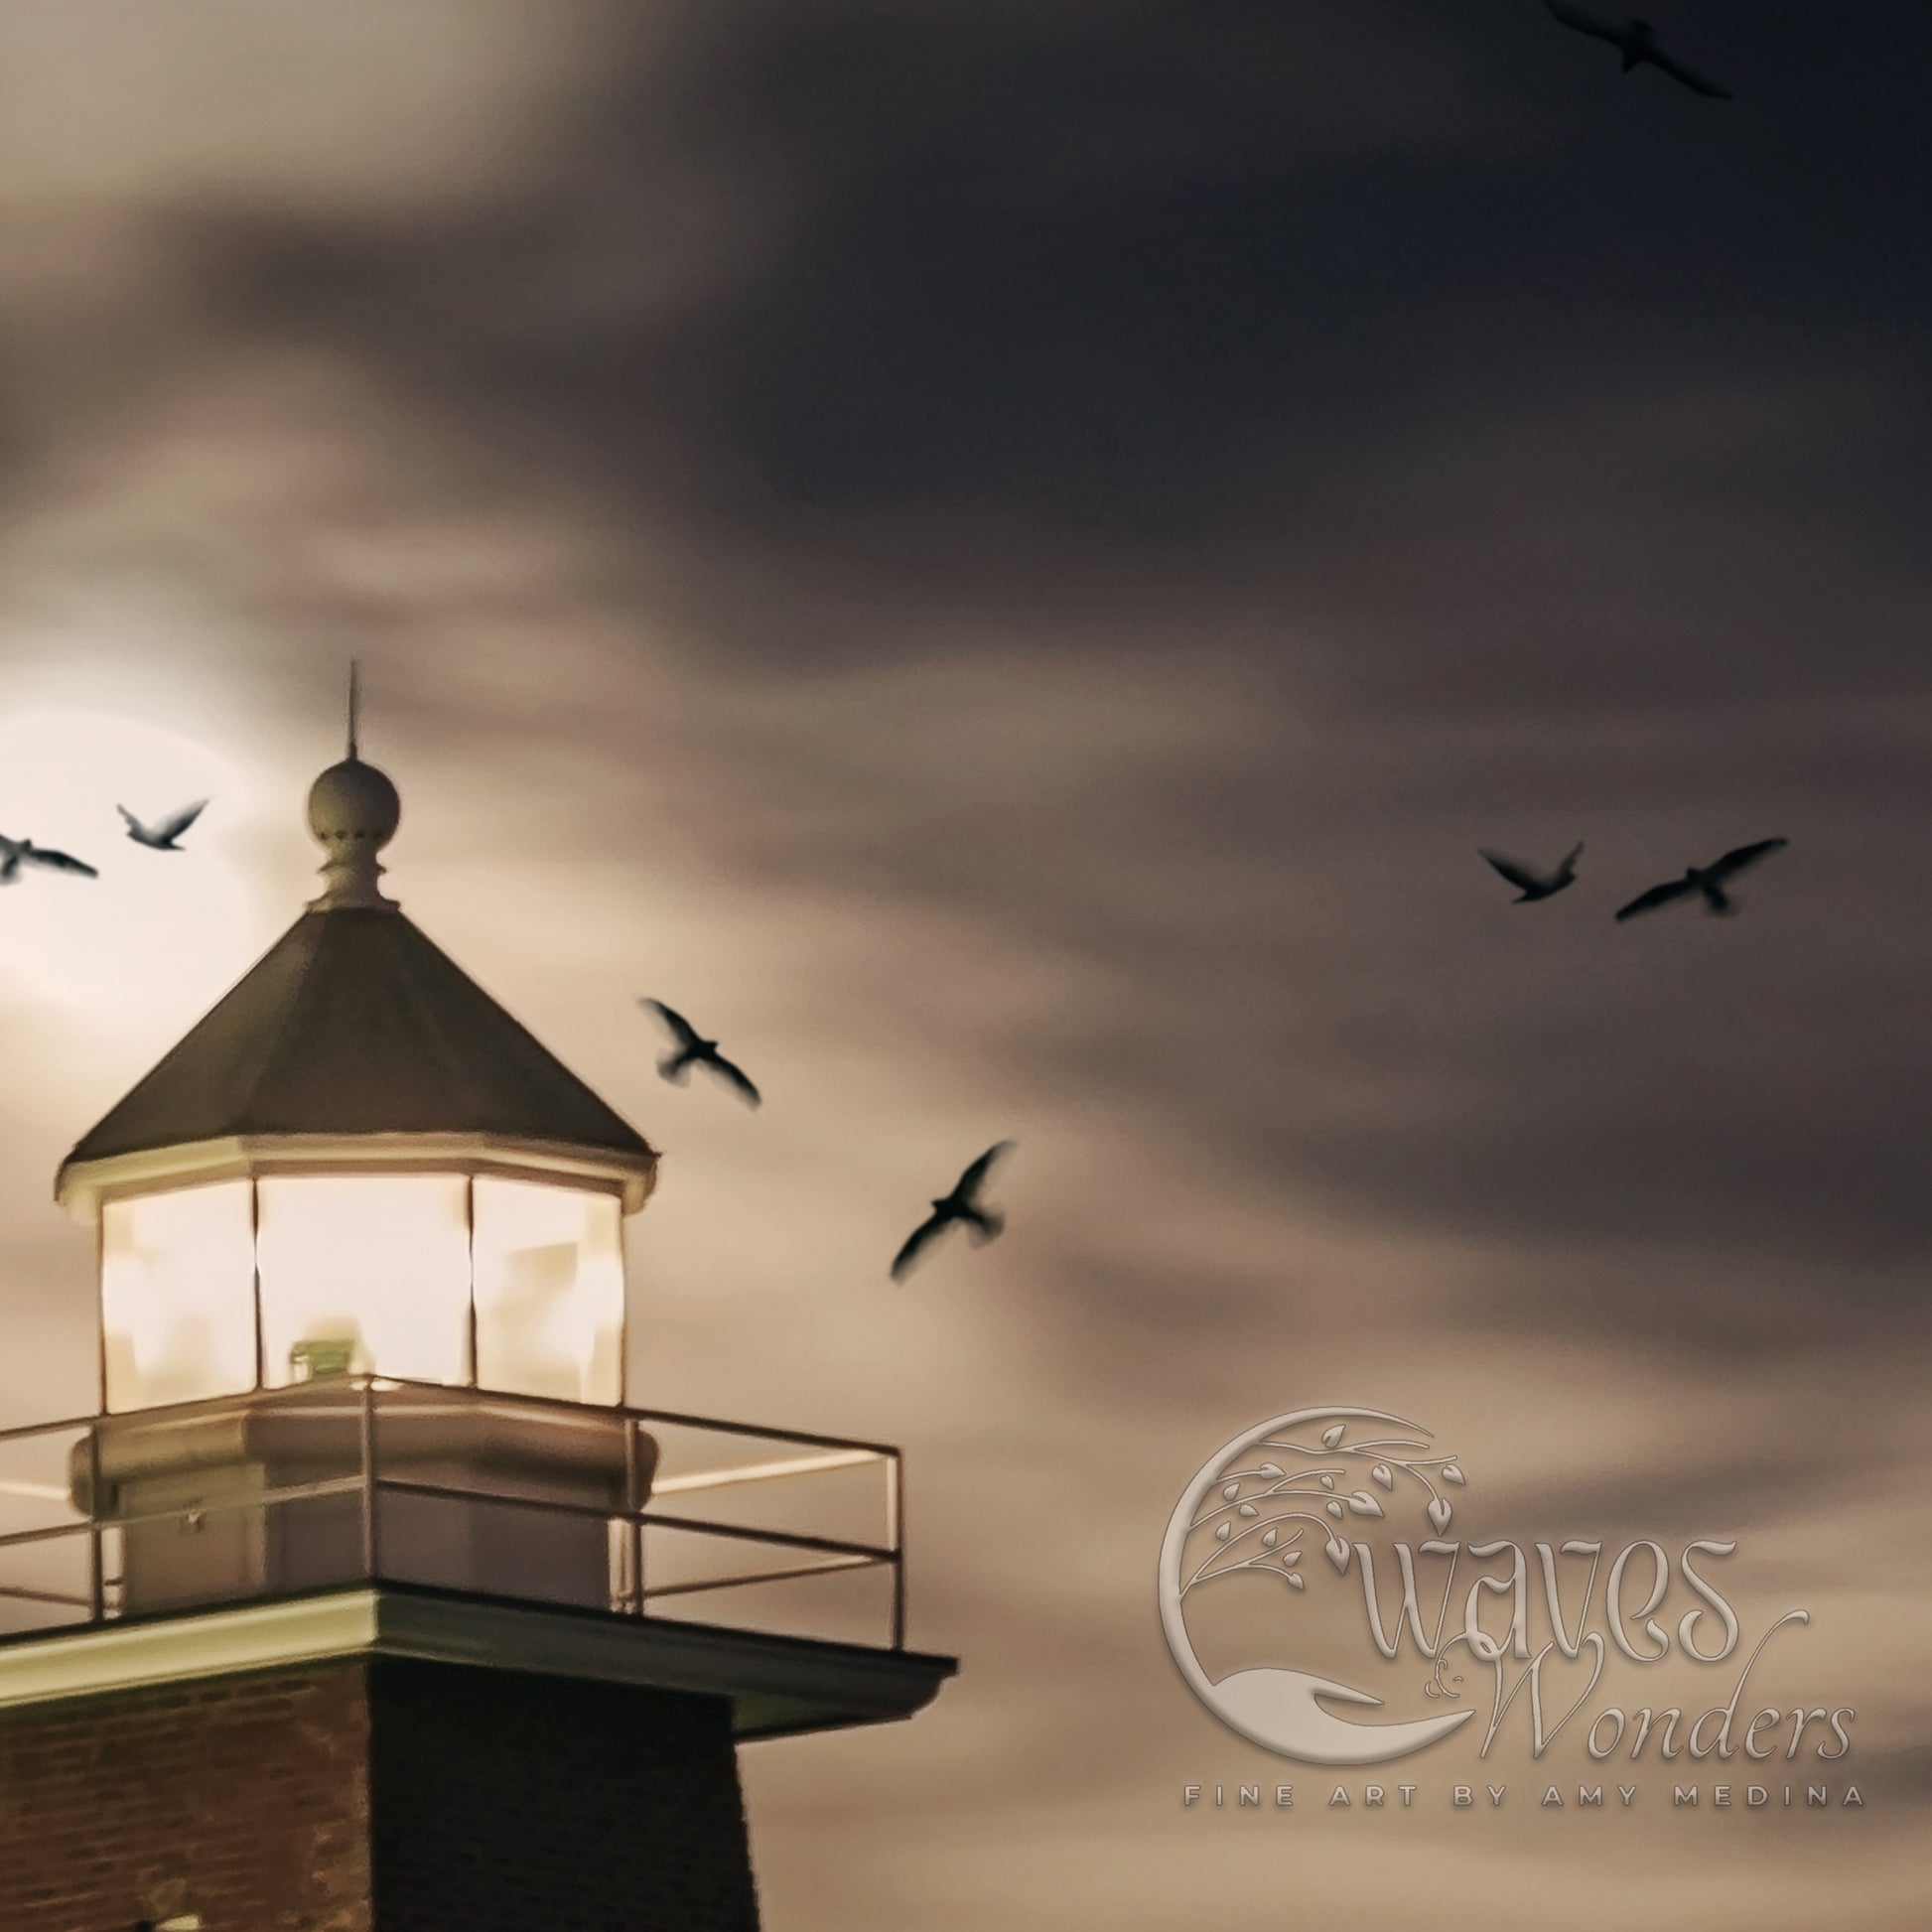 a light house with birds flying around it